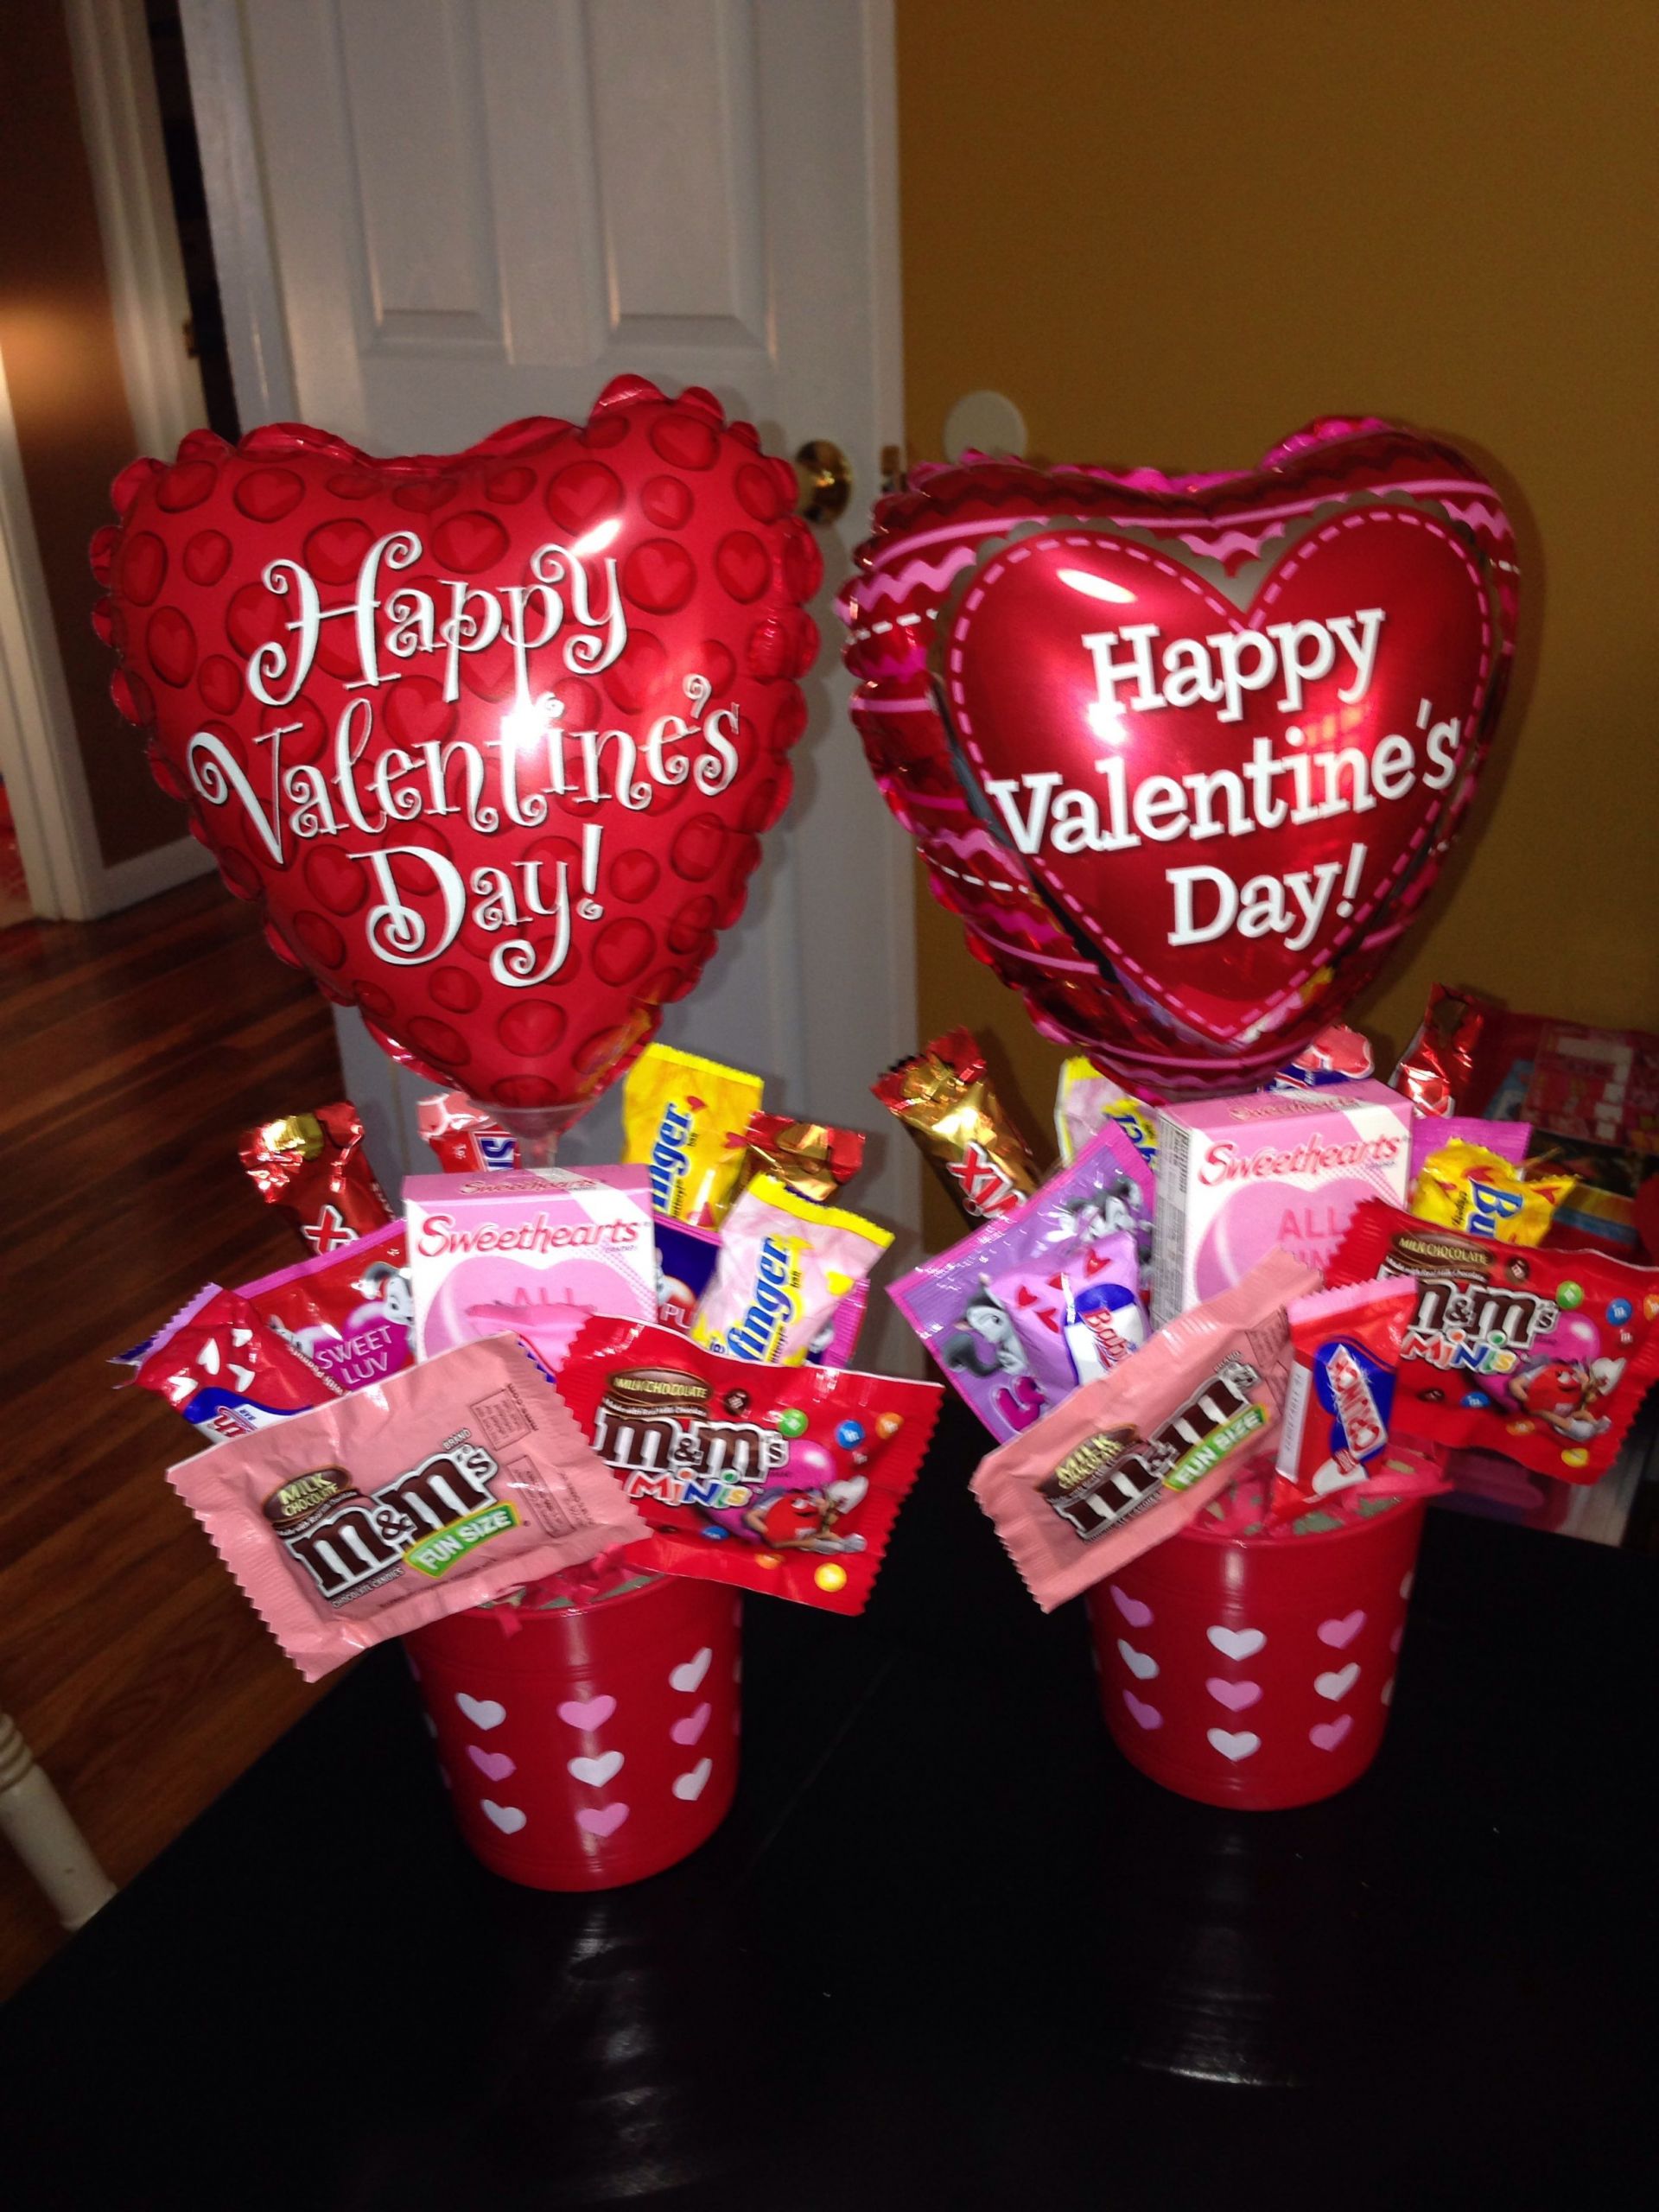 Candy Gift Baskets For Valentines Day
 Pin on Candy bouquets